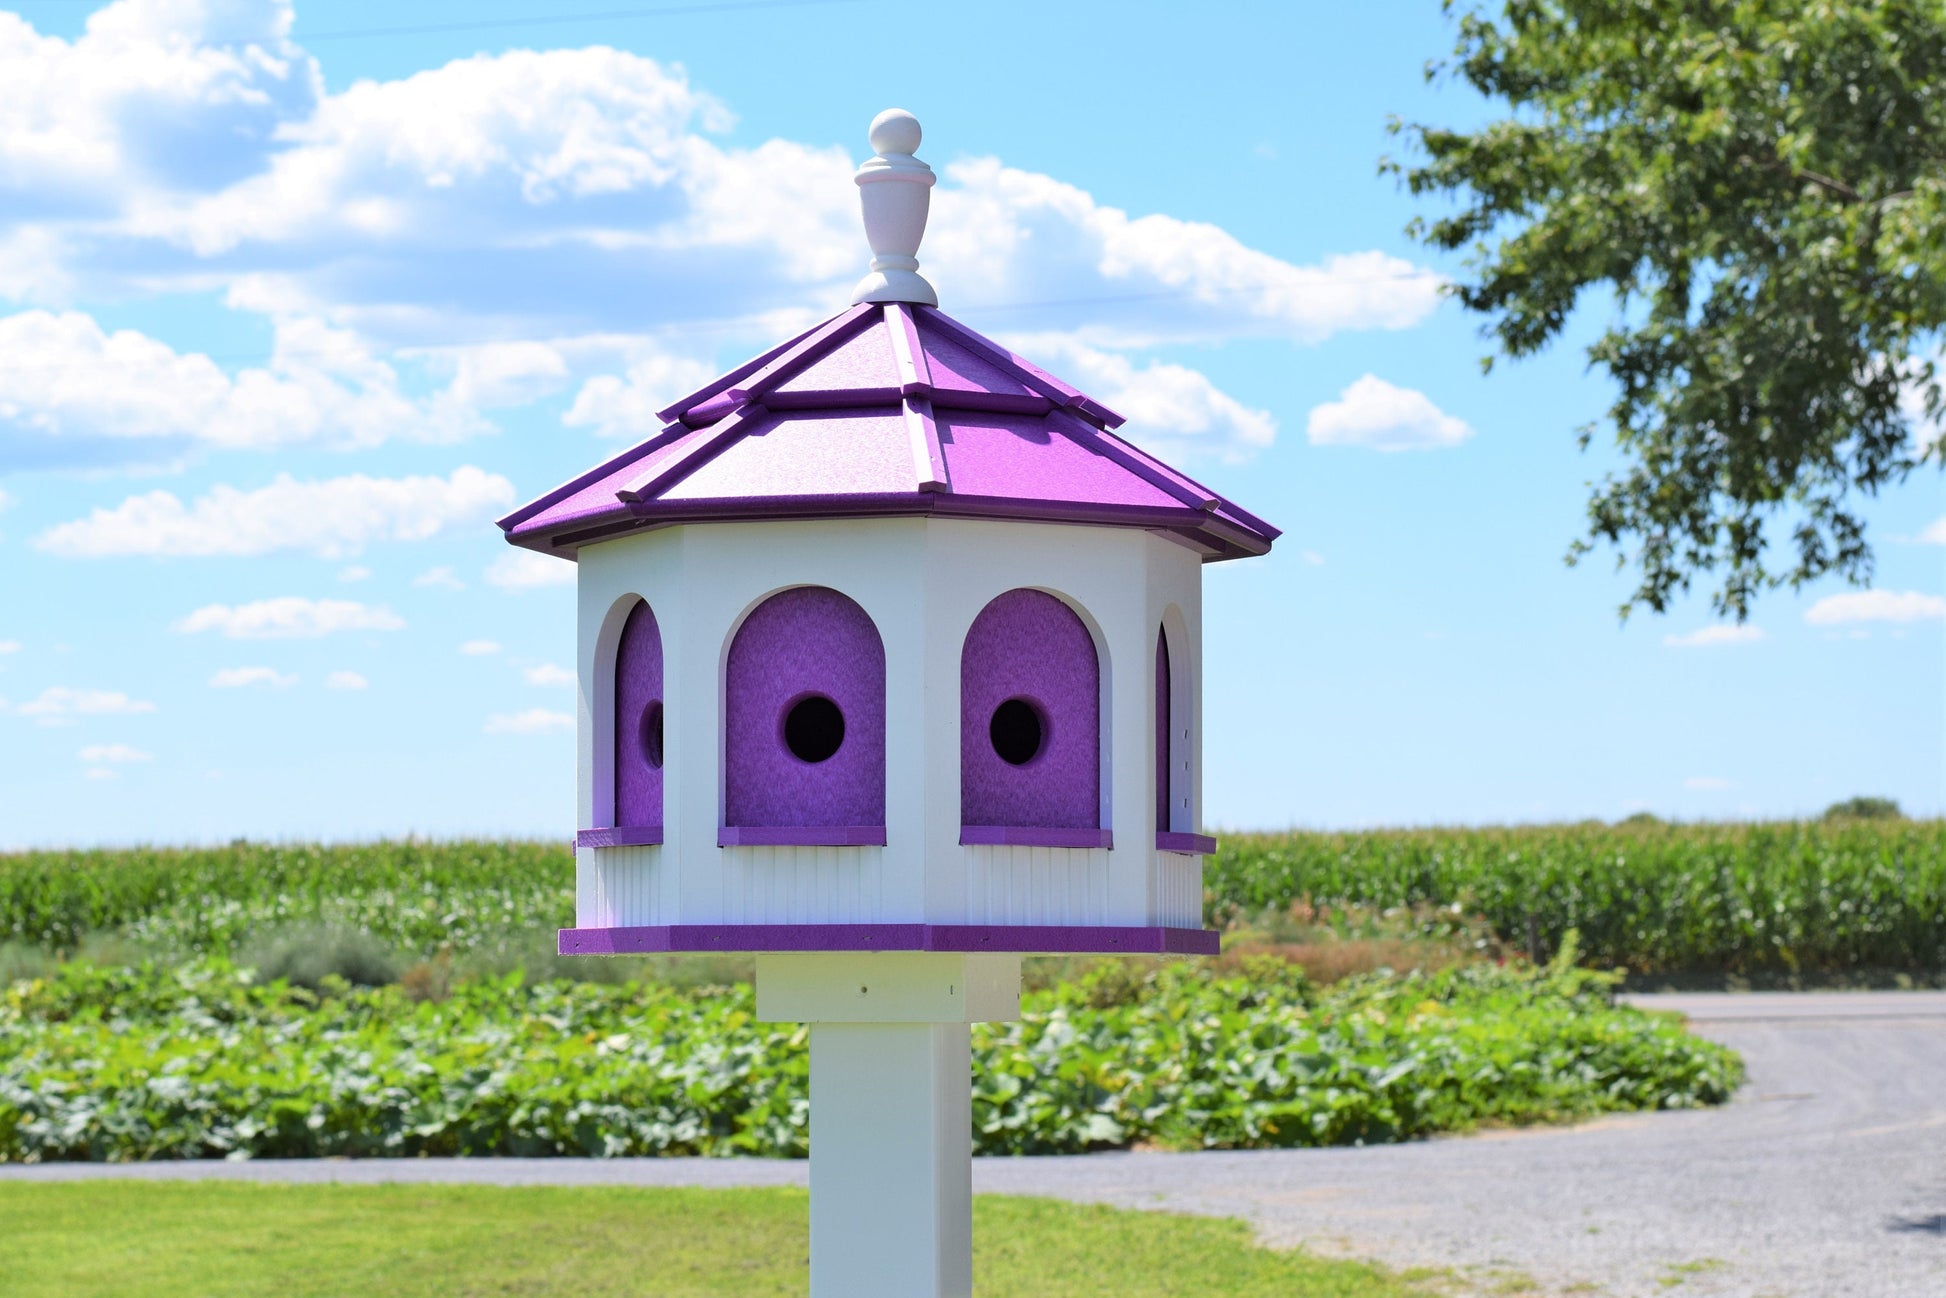 large poly bird house white with bright purple inner wall and roof